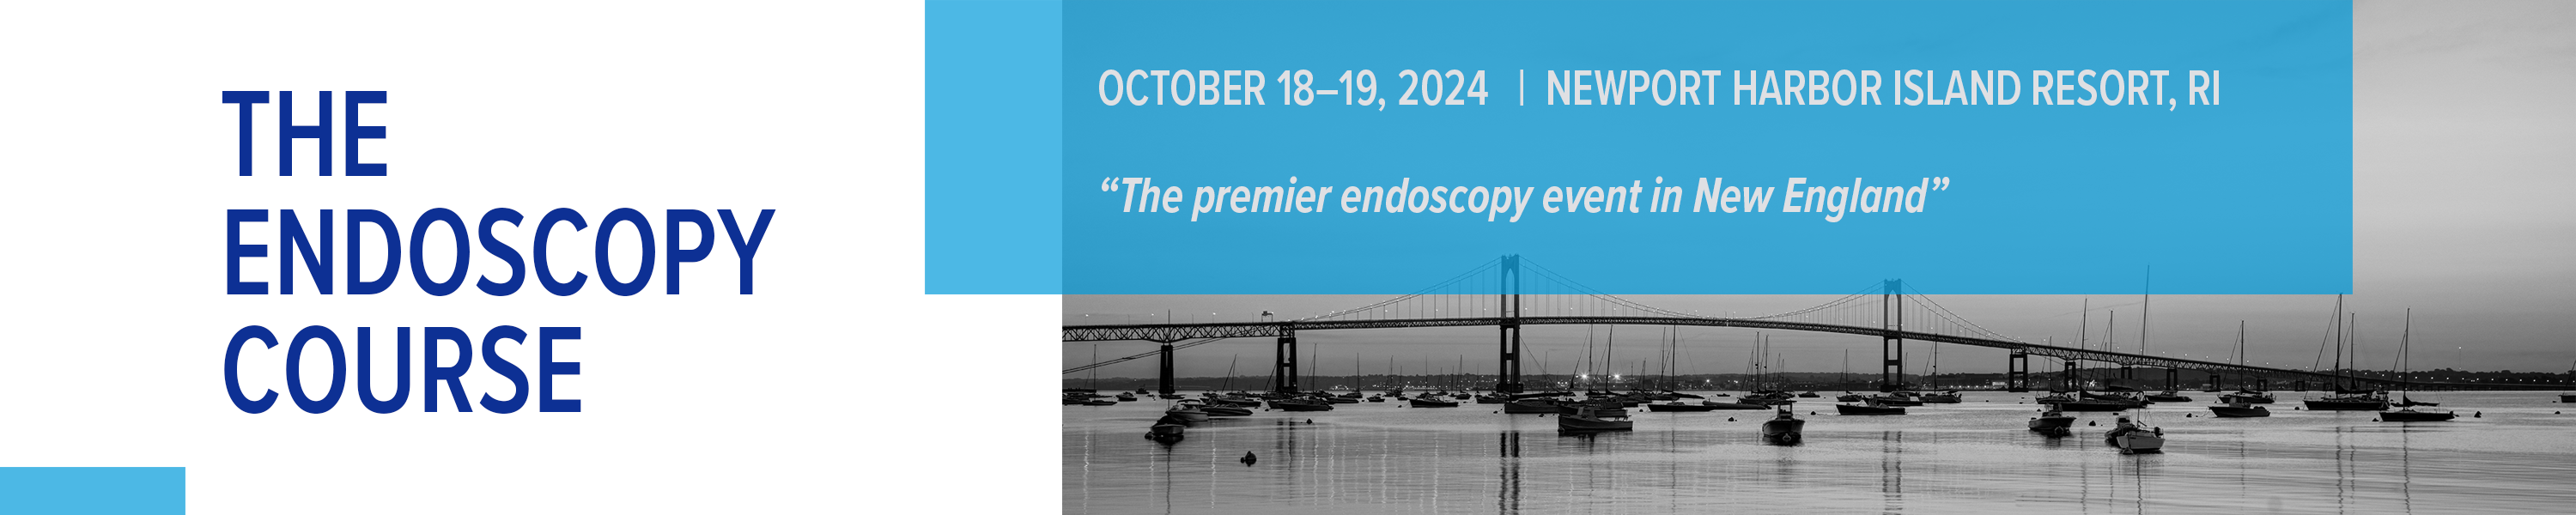 11th Annual The Endoscopy Course – Cases and Controversies in Endoscopy Banner